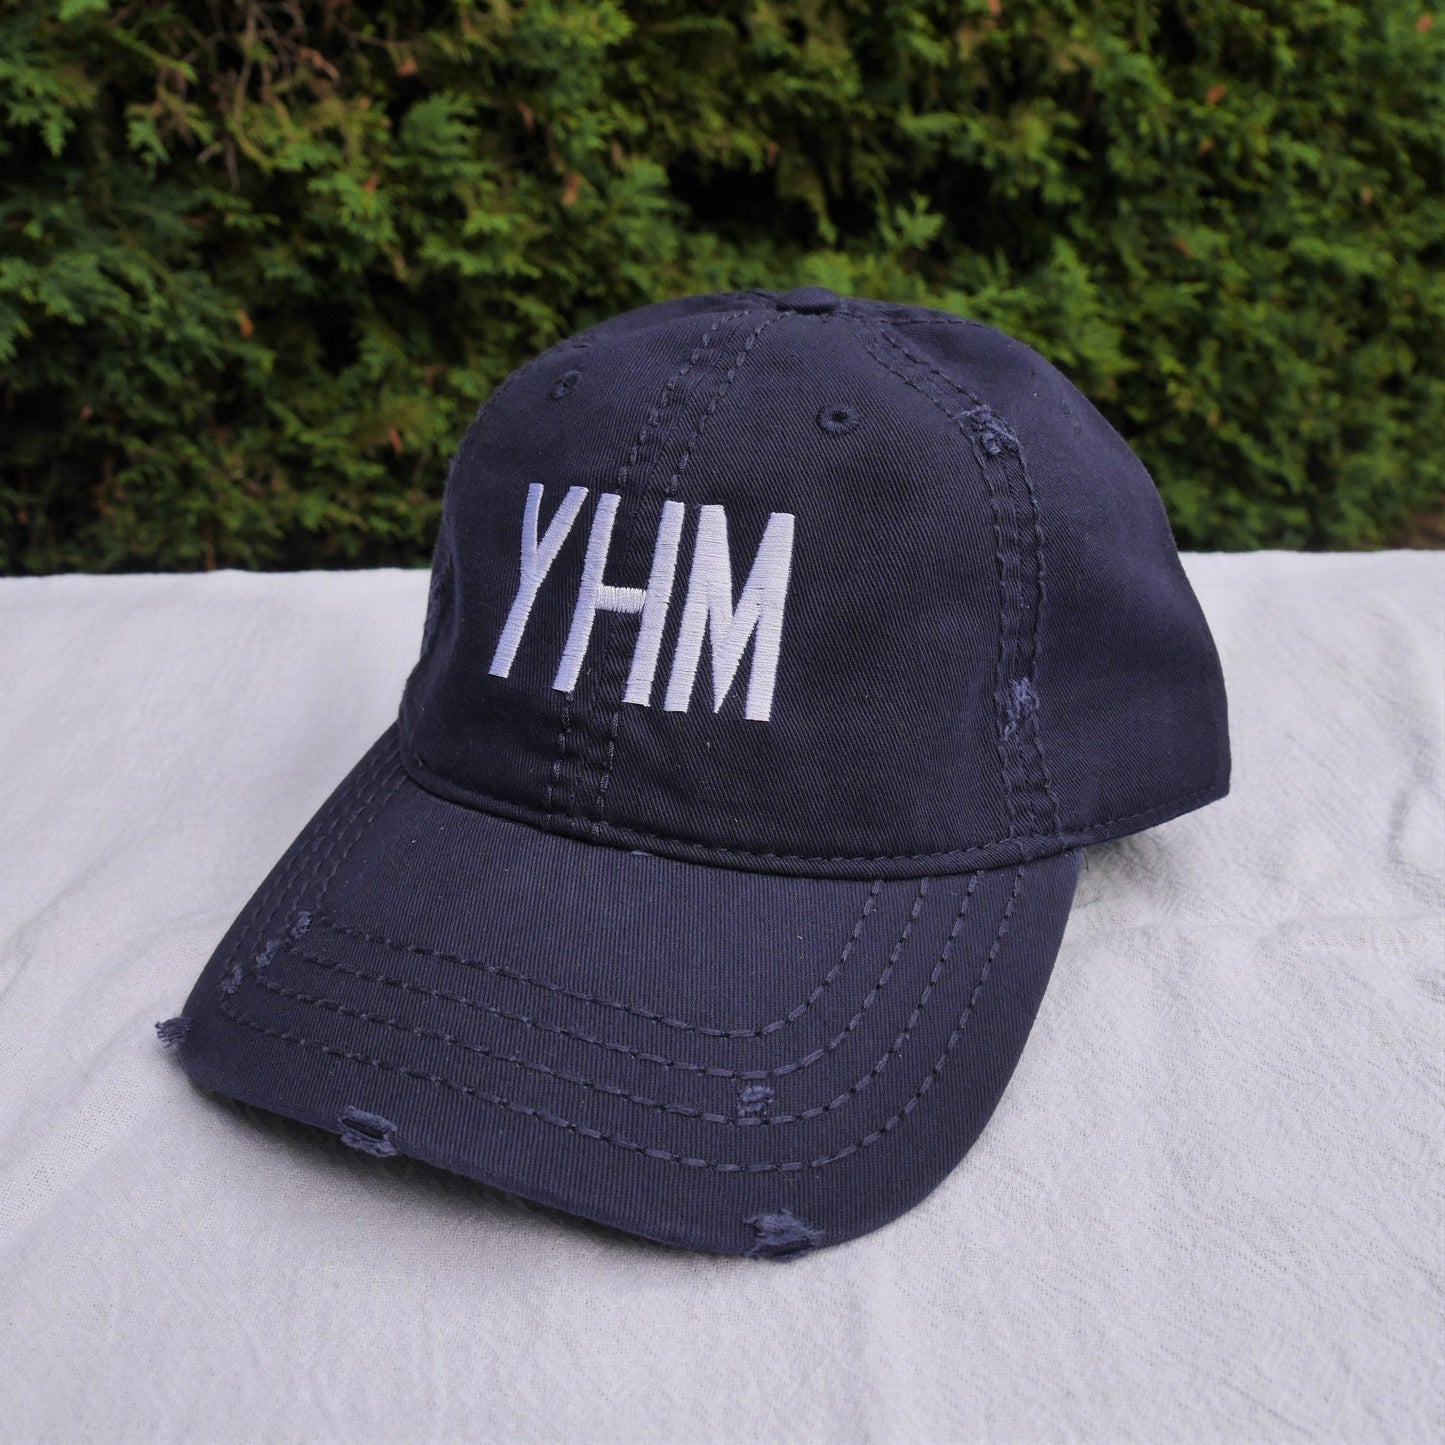 Airport Code Baseball Cap - White • YMM Fort McMurray • YHM Designs - Image 31